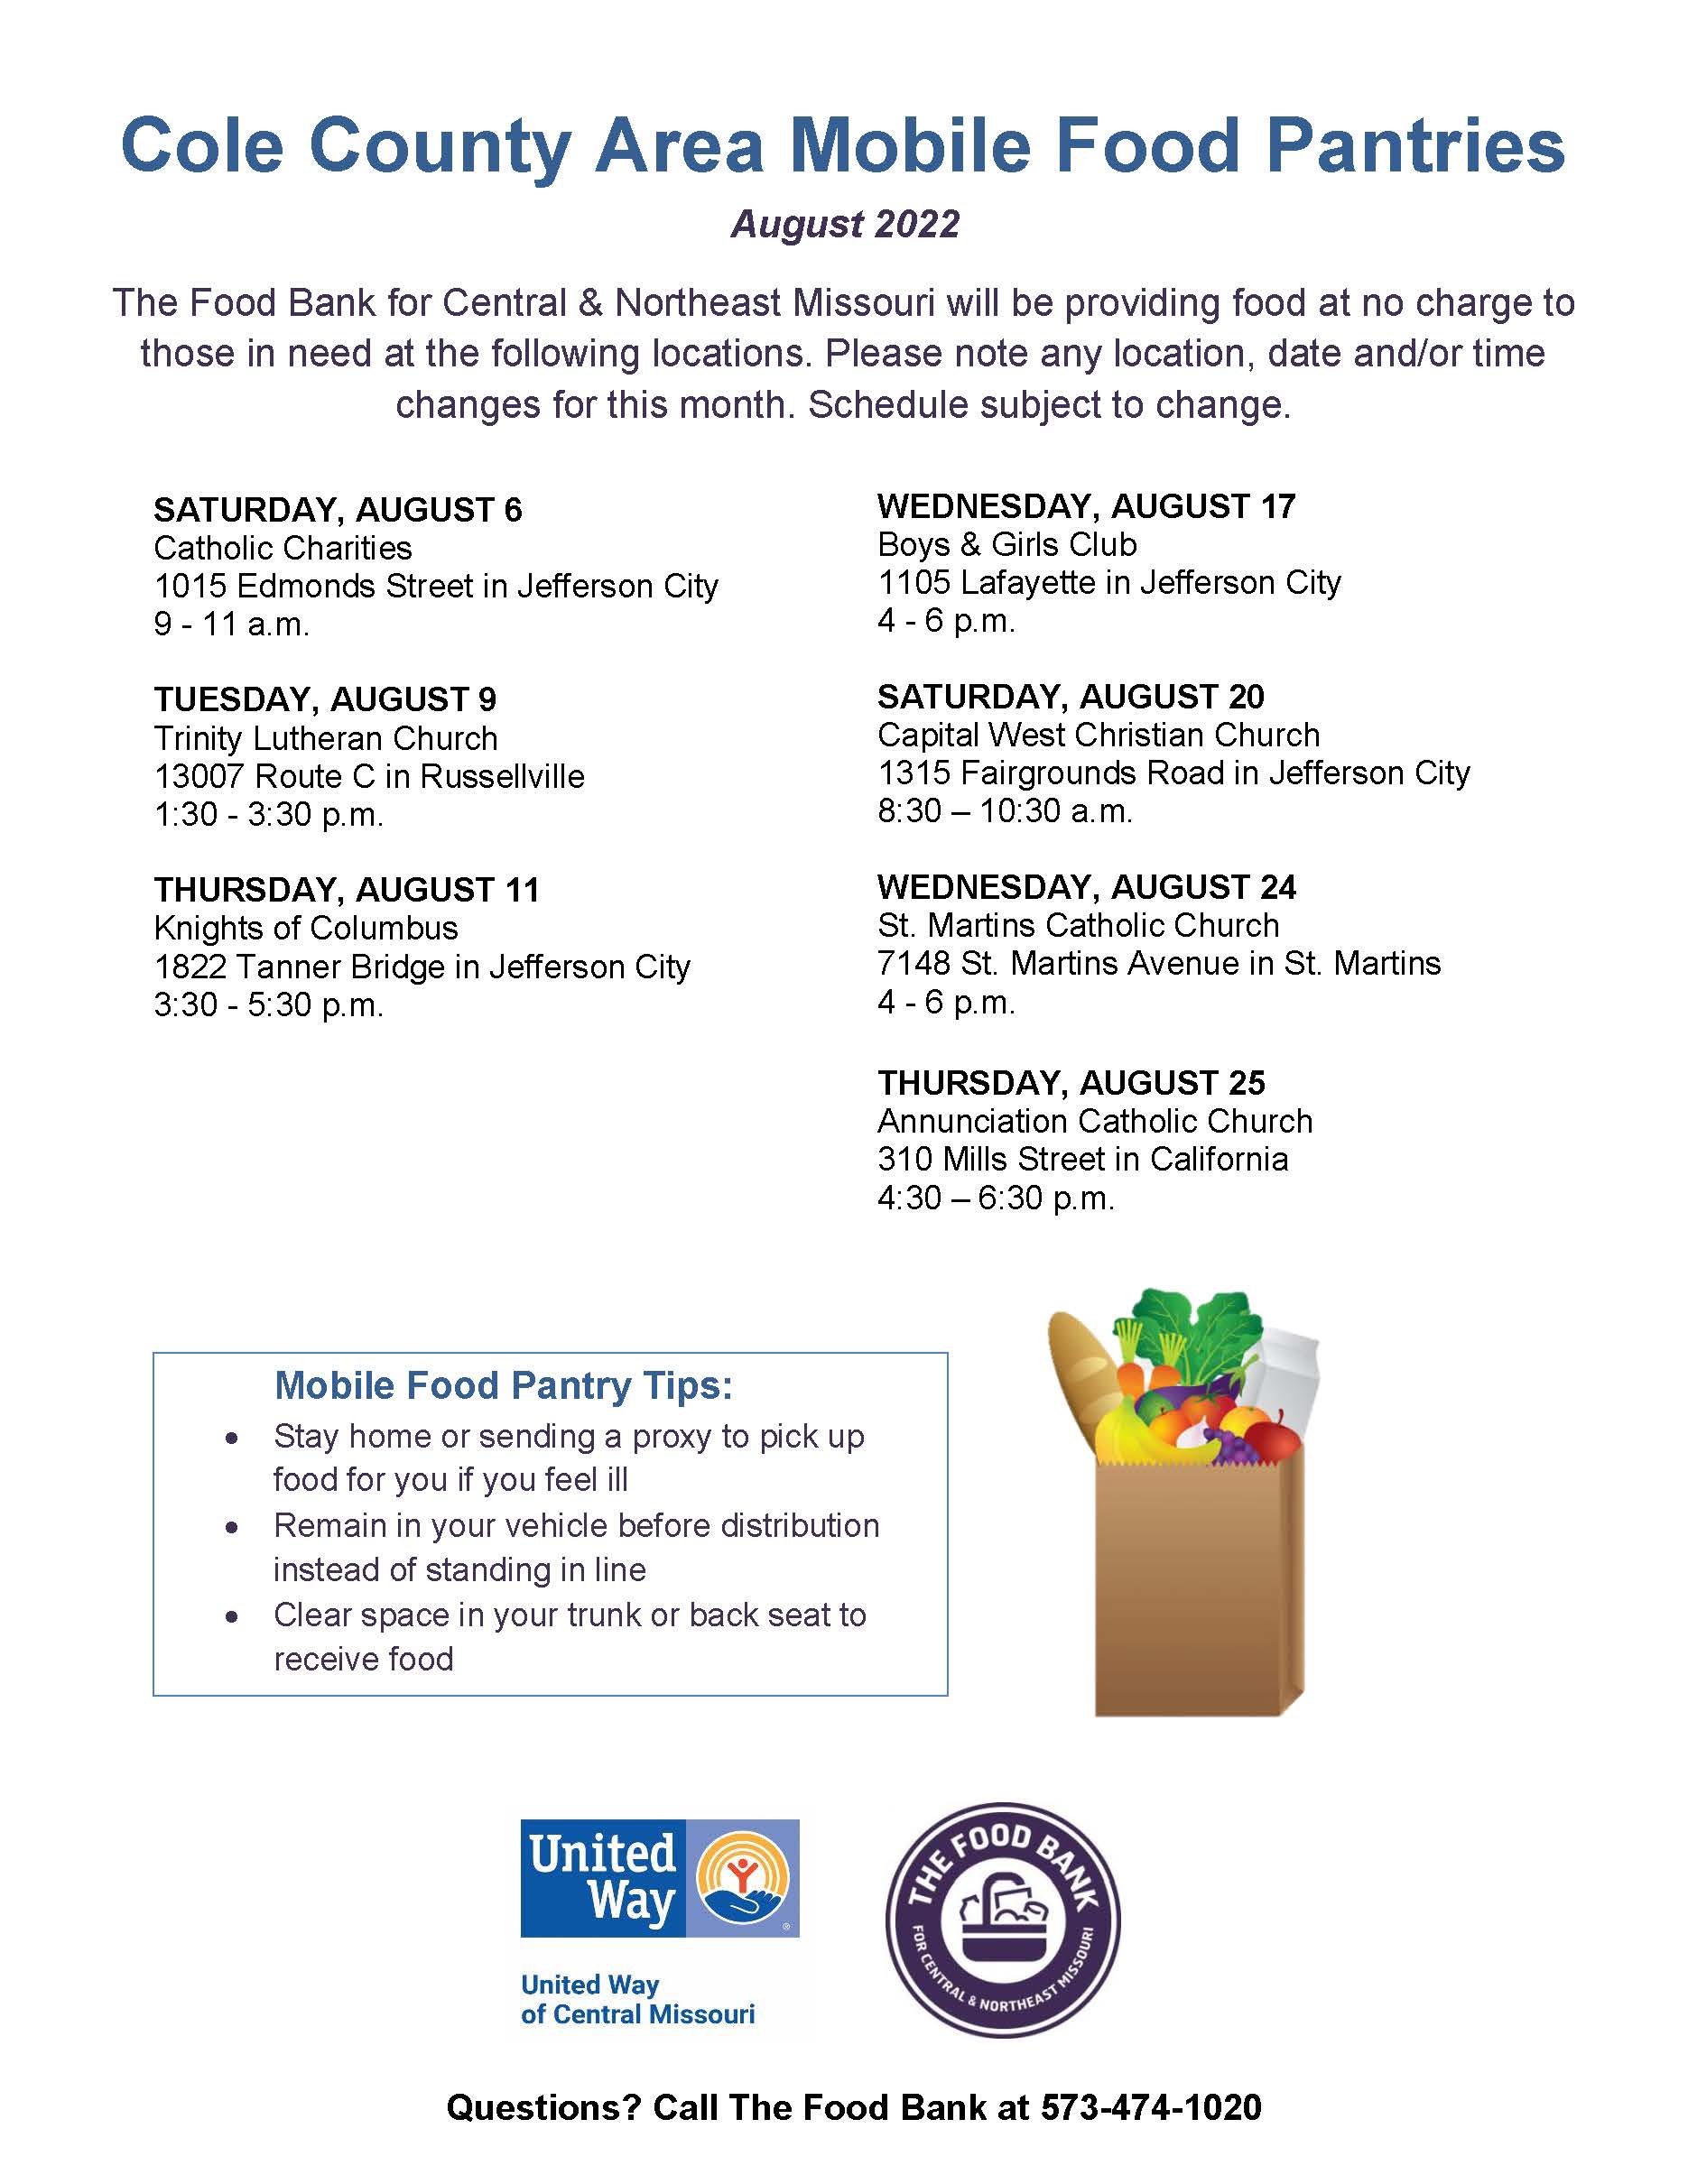 Mobile Food Pantry @ Catholic Charities from 9 am - 11 am